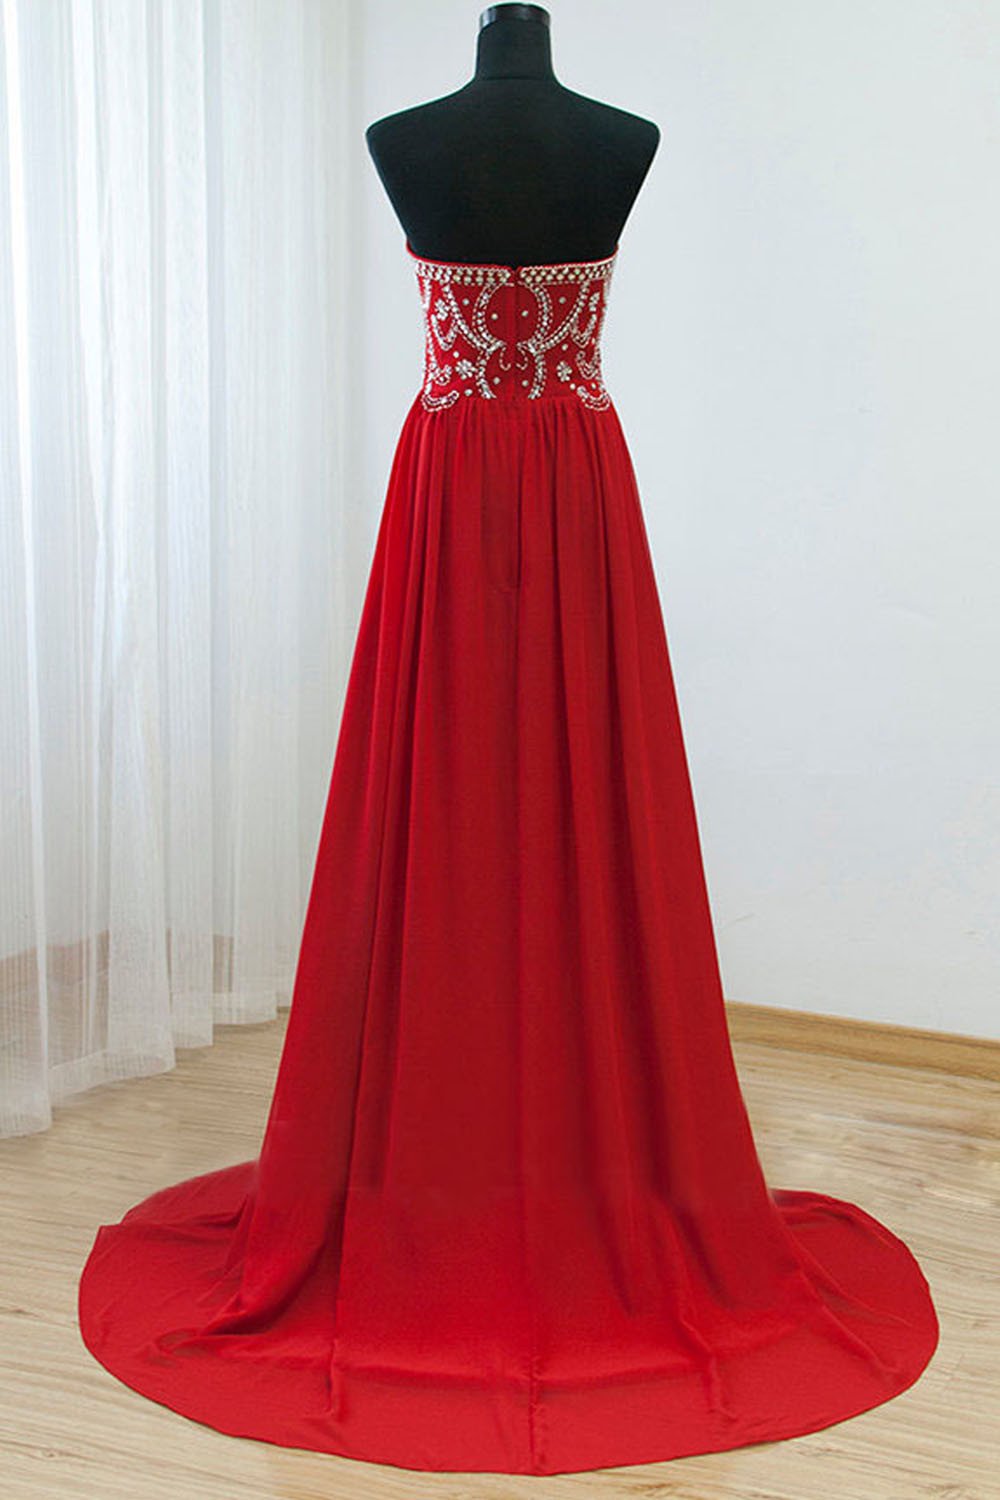 Empire Waist Red Backless Sexy Long Prom Evening Dress ED0876